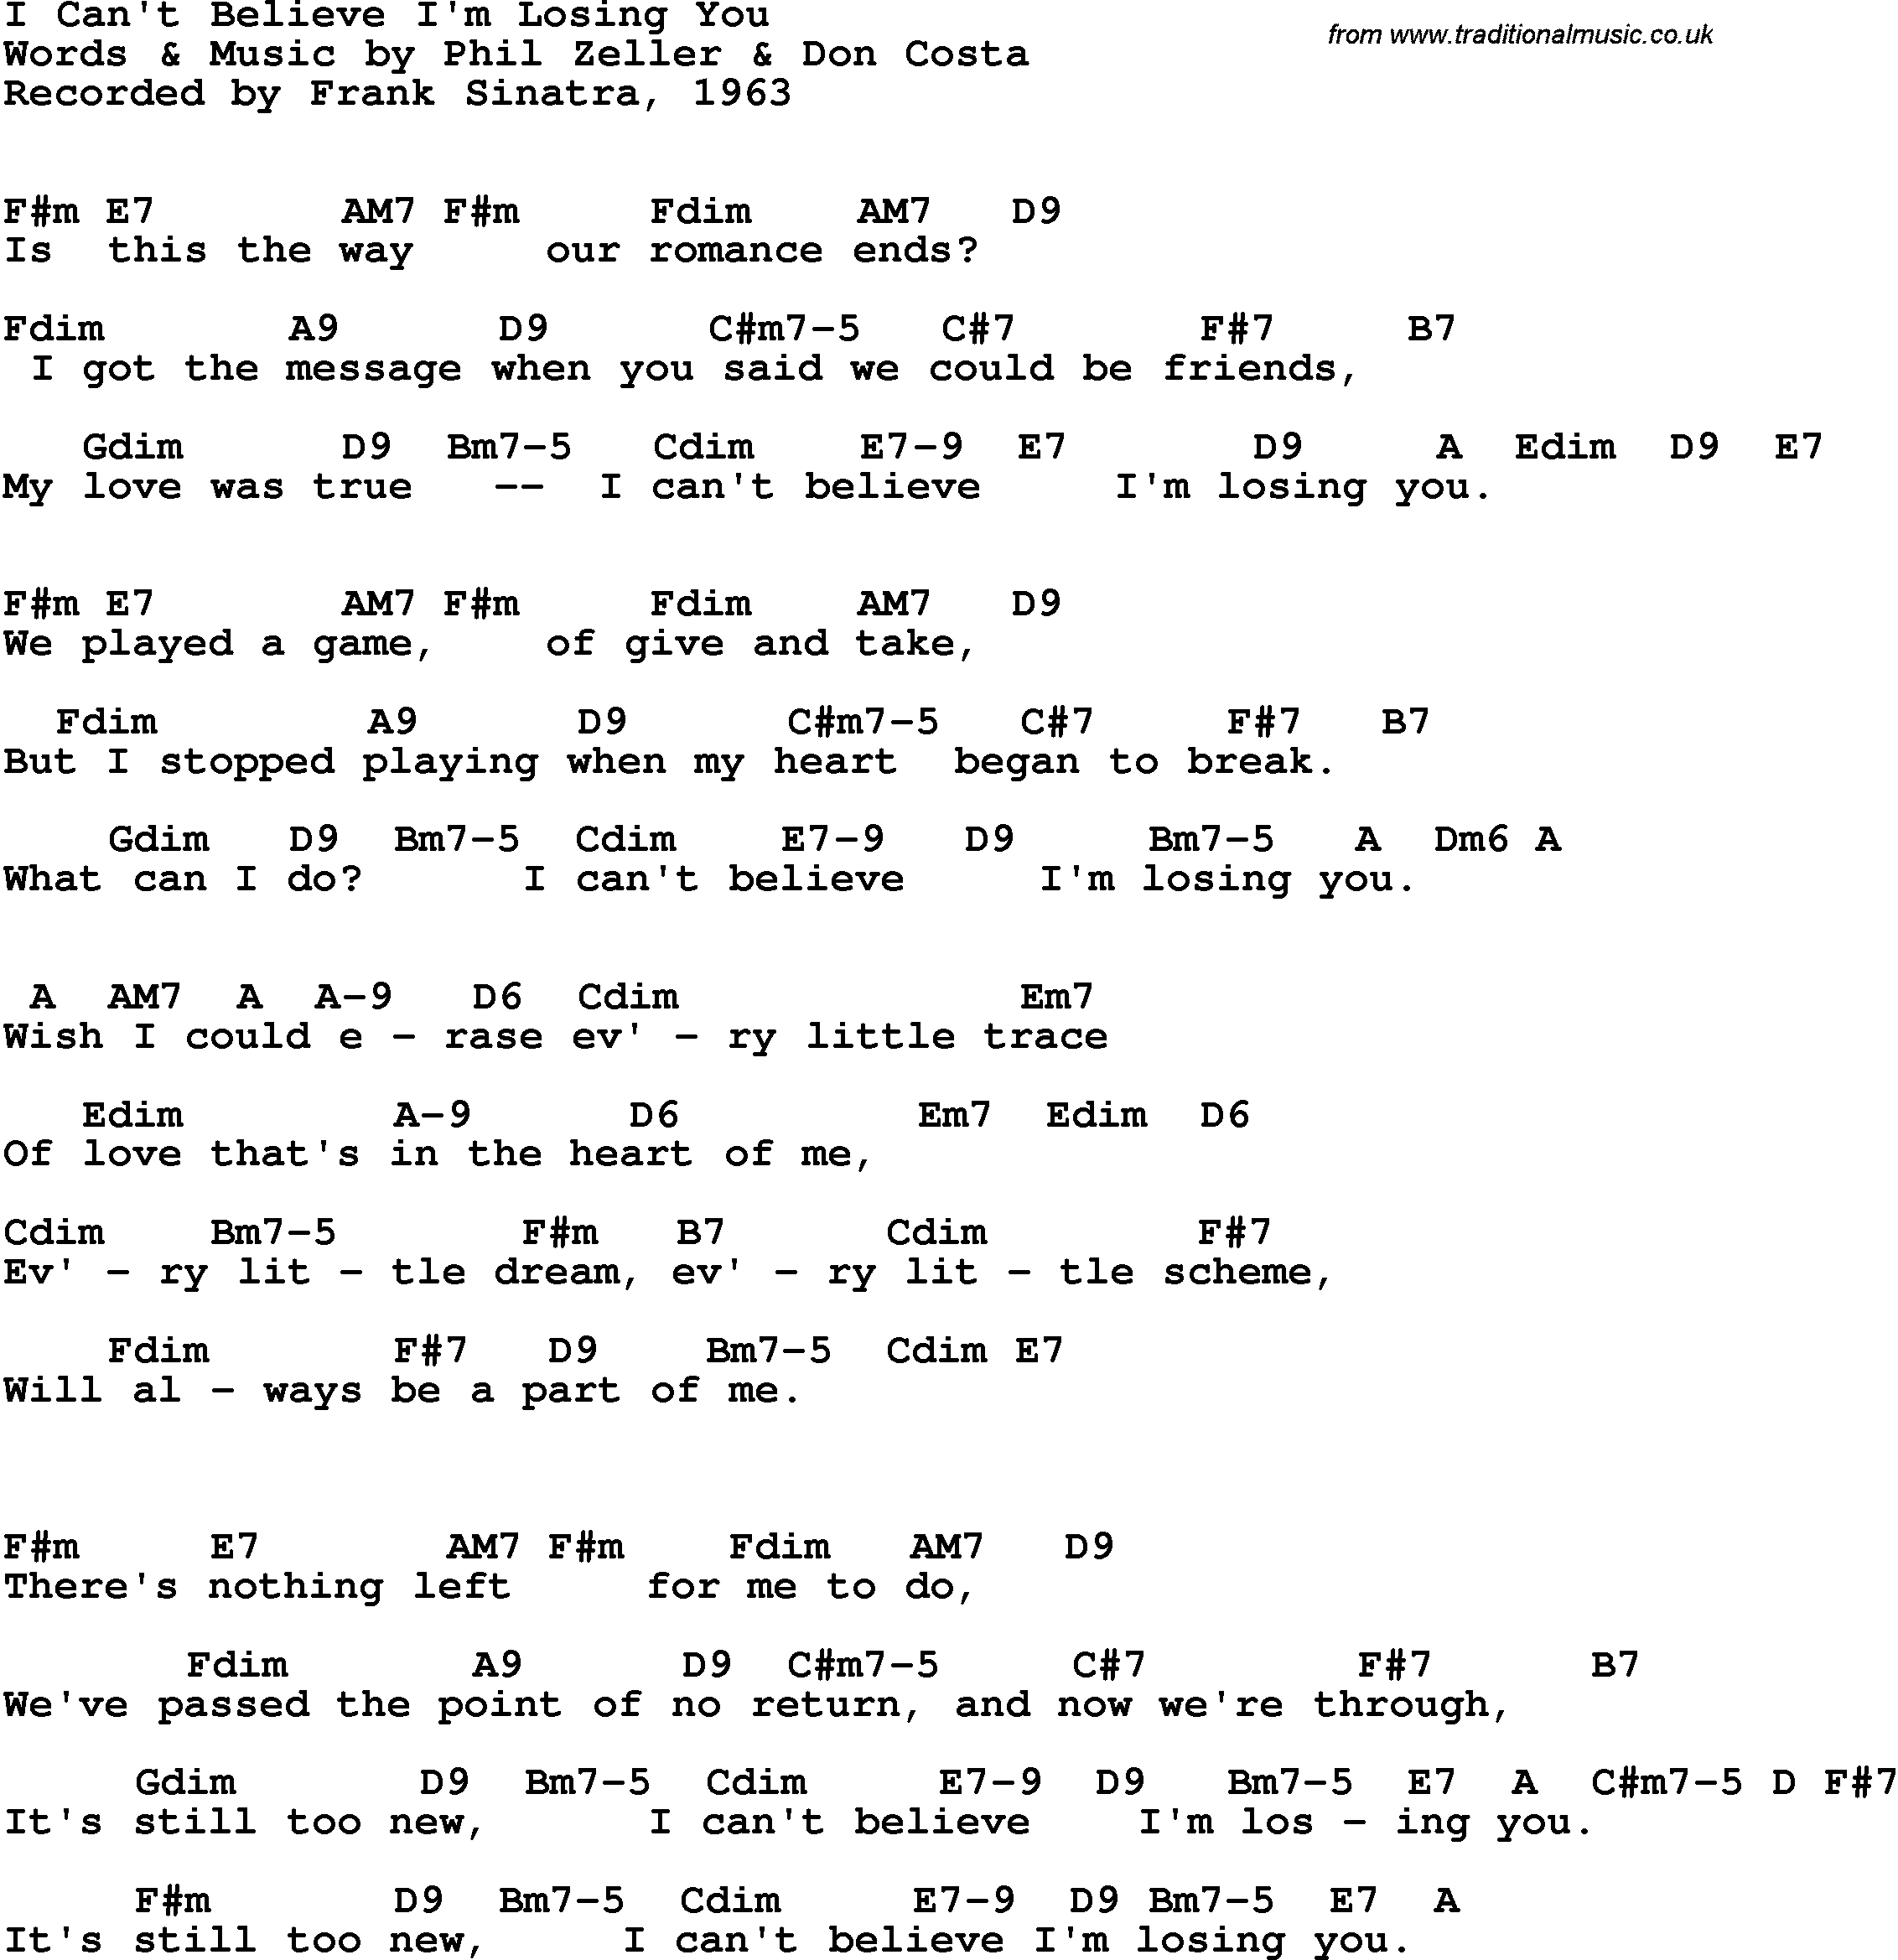 Song Lyrics with guitar chords for I Can't Believe I'm Losing You - Frank Sinatra, 1963